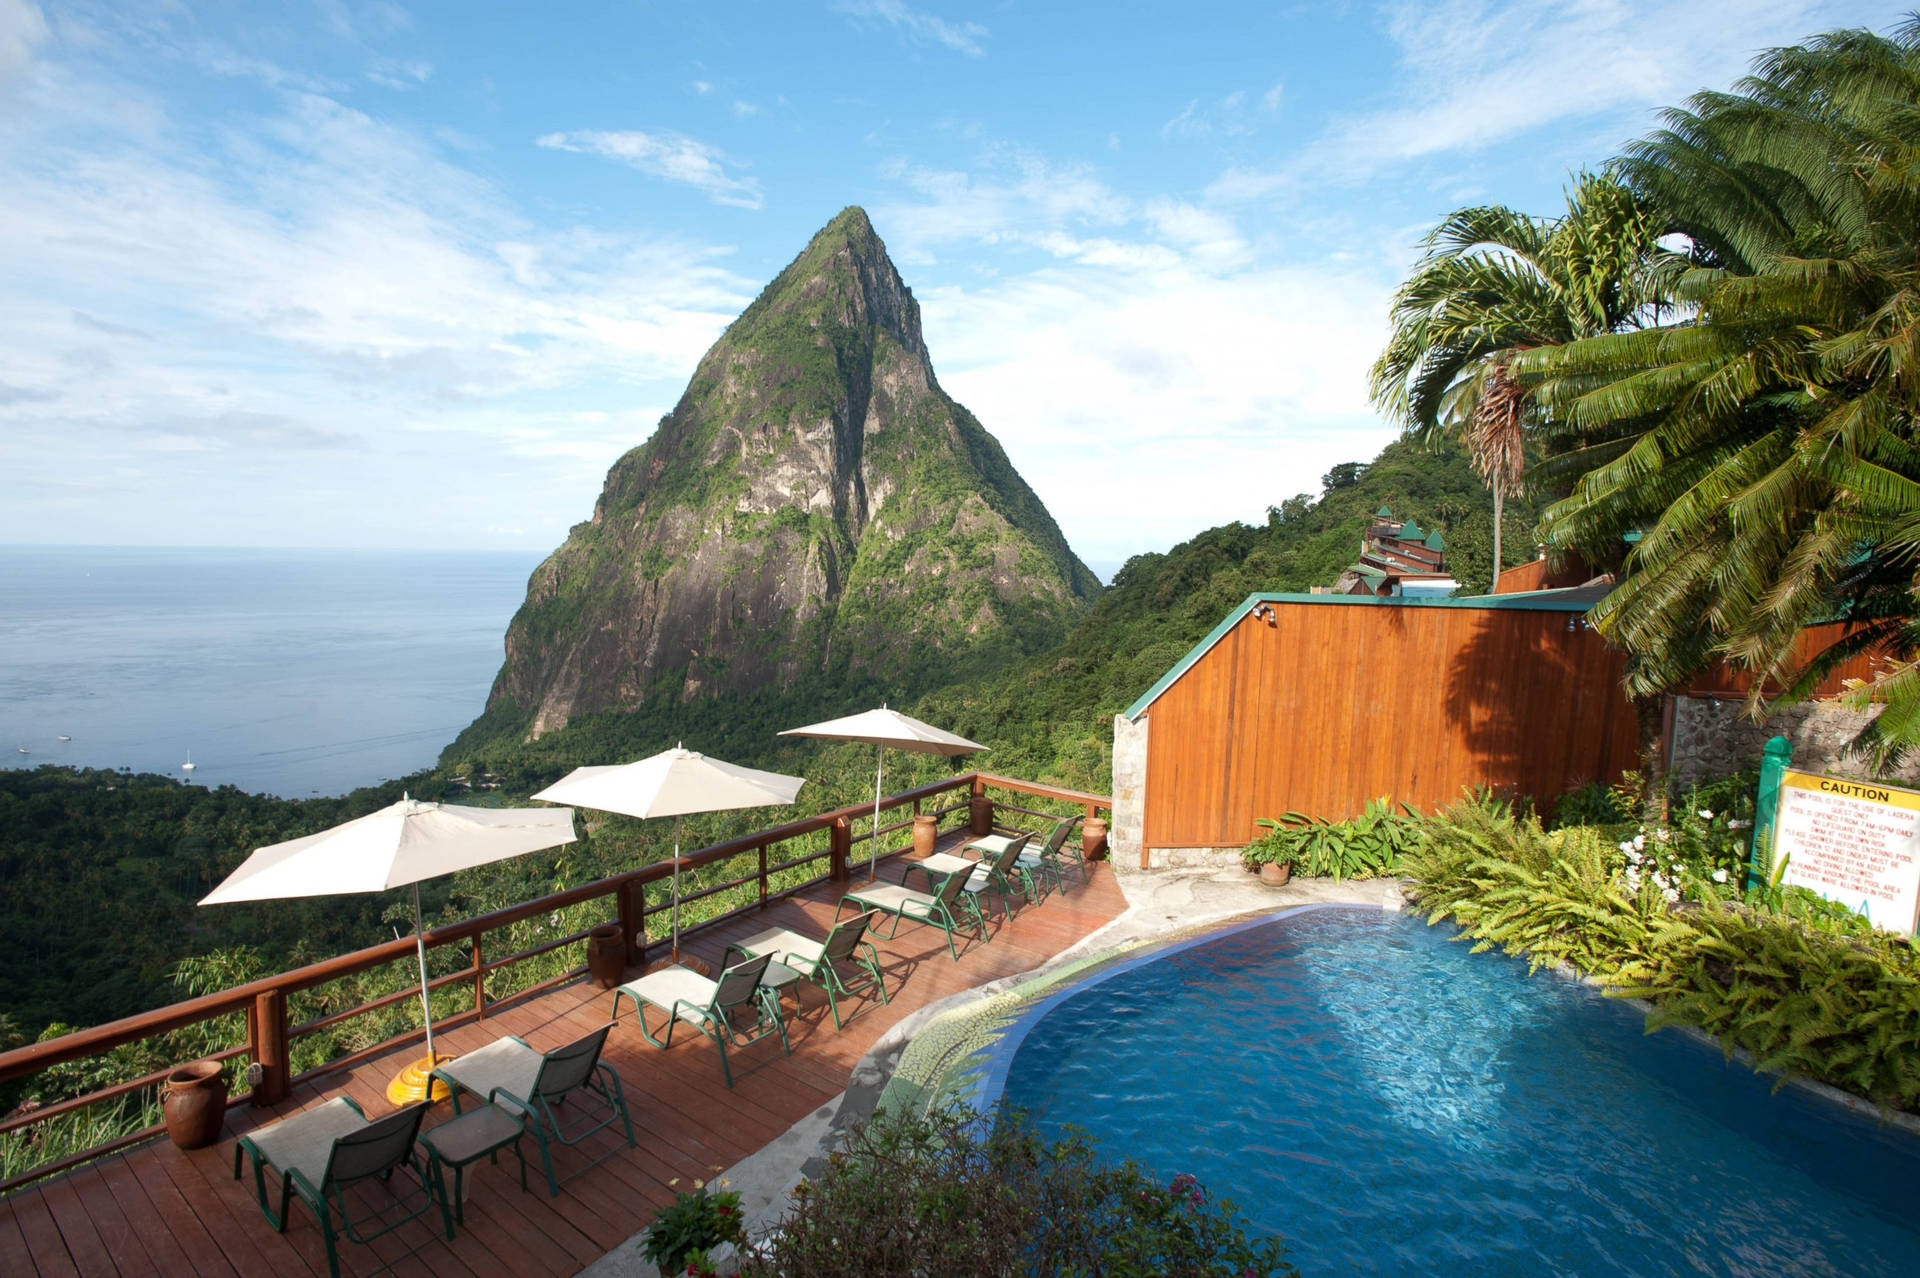 Stlucia Ladera Resort Can Be Translated To German As 